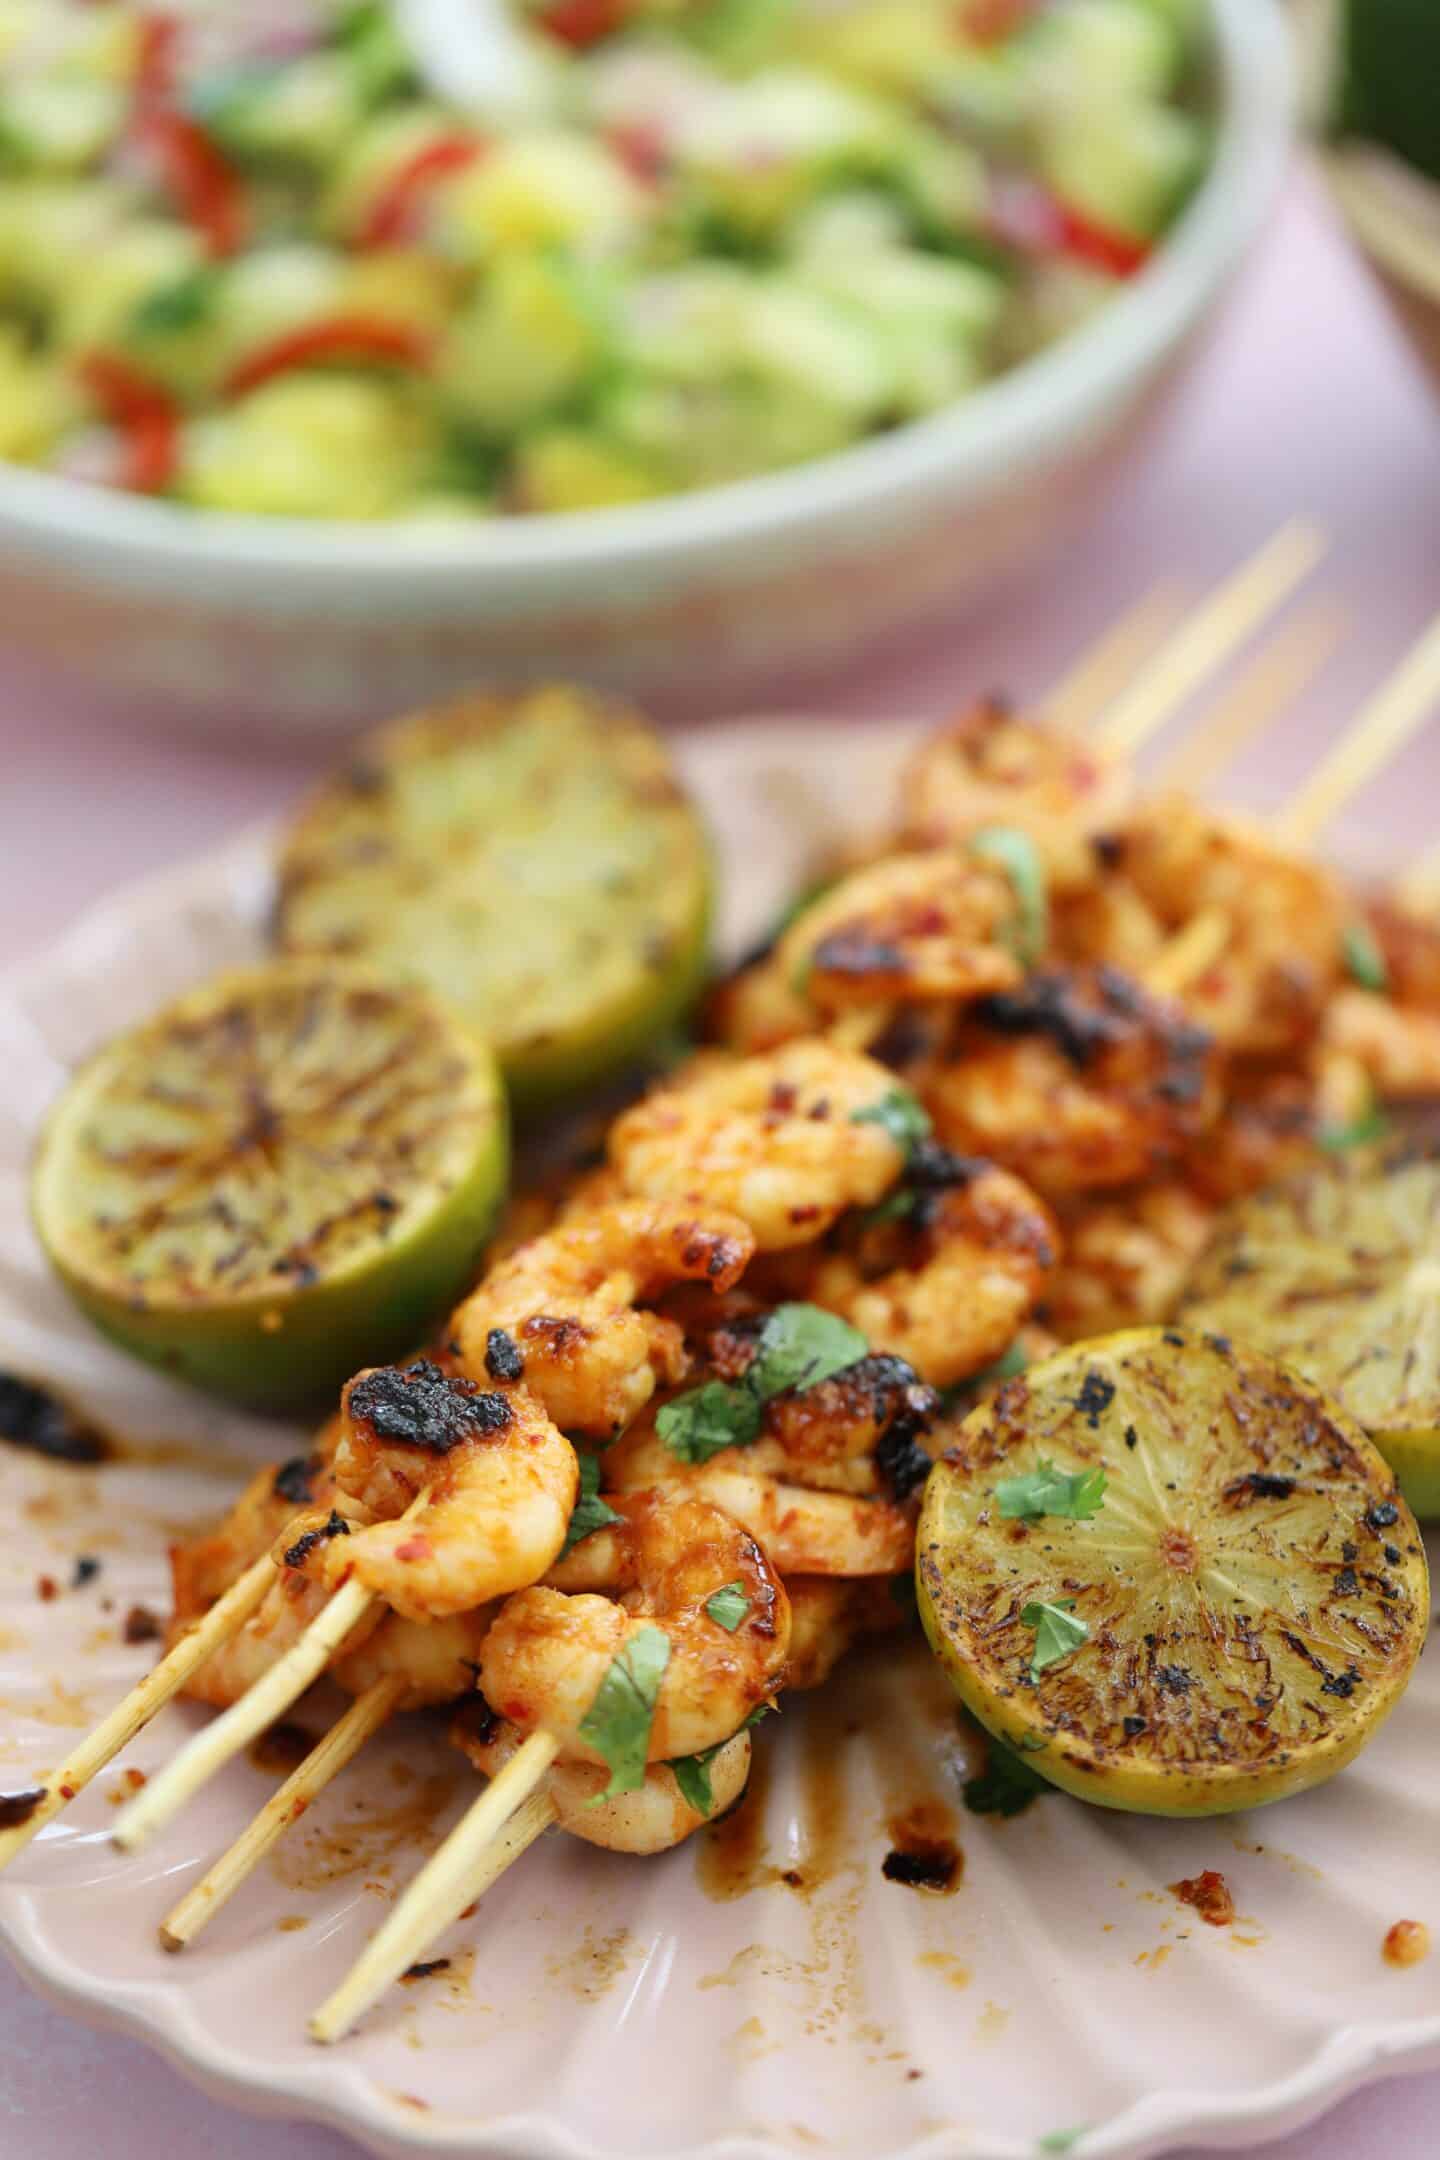 Grilled shrimp skewers with lime wedges and salsa in background.